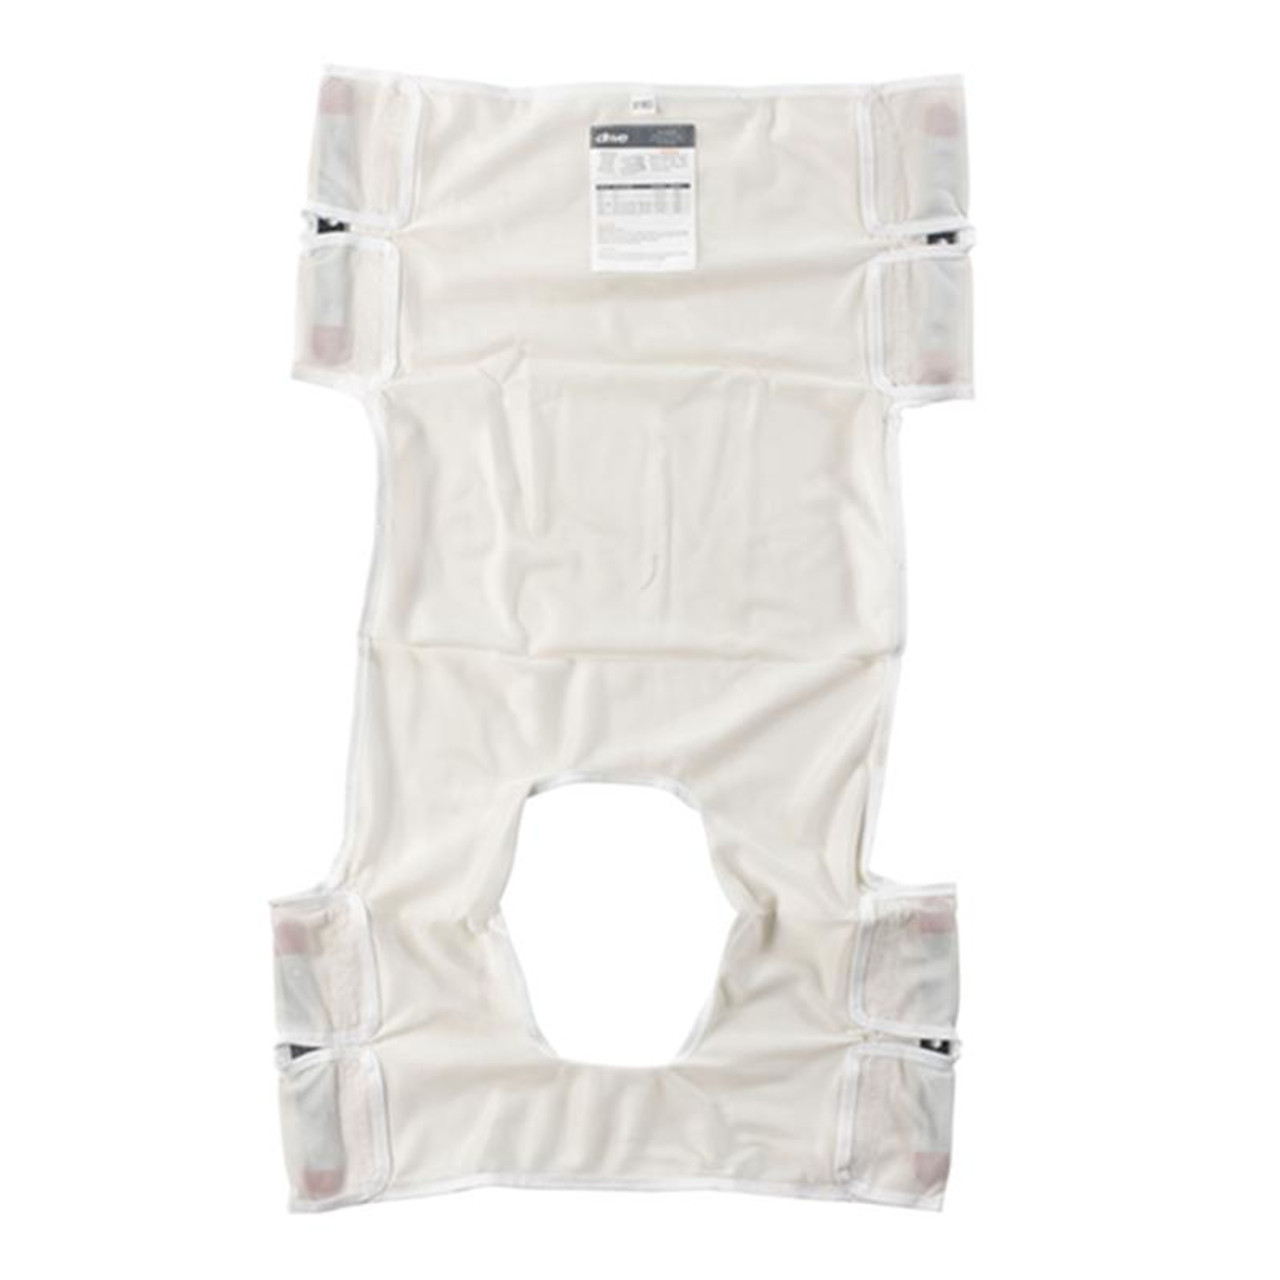 Drive Medical 13026 Patient Lift Sling, Polyester Mesh with Commode Cutout, Each, A4565